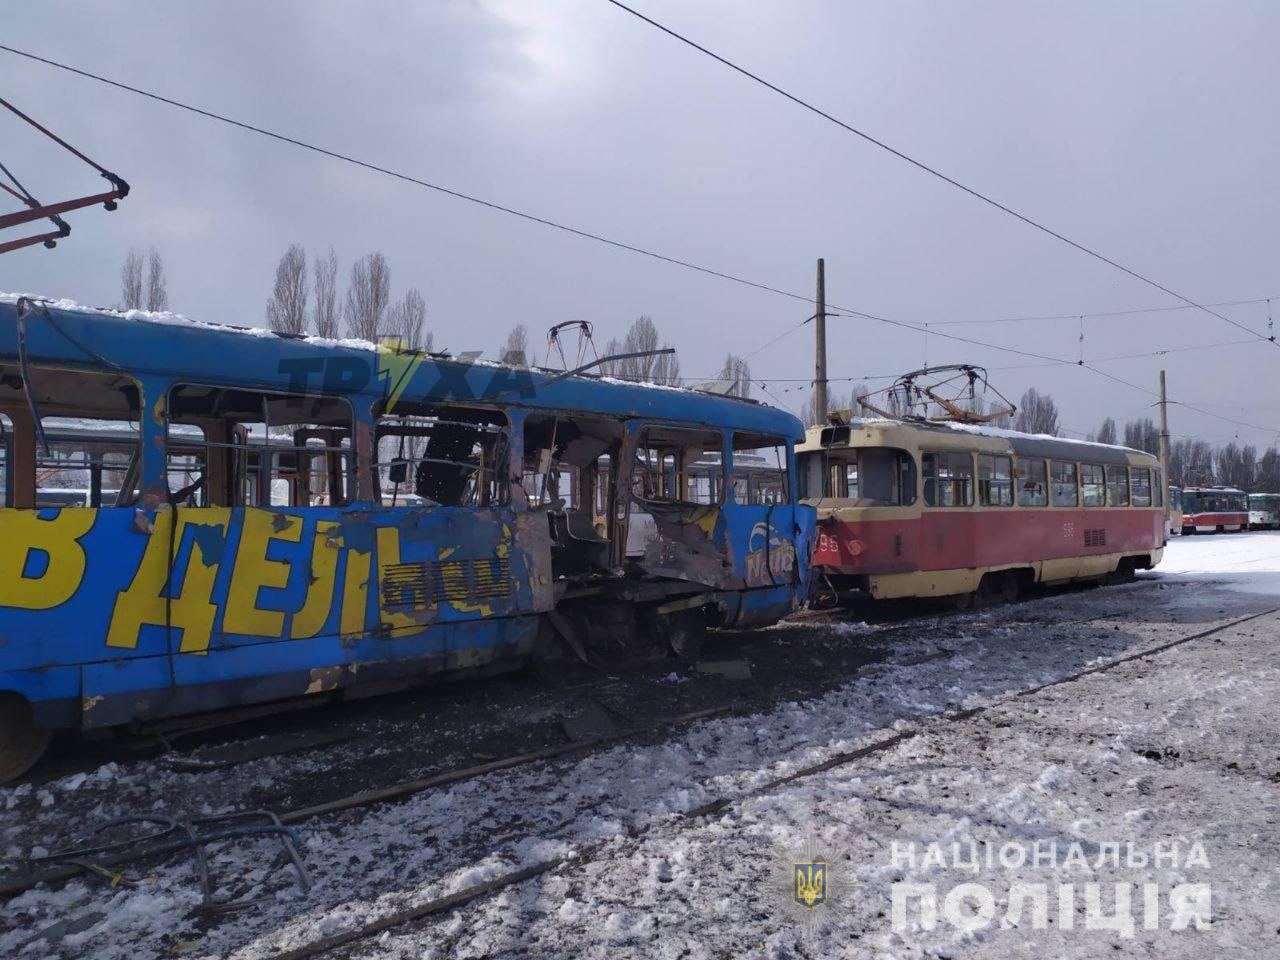 A tram of Kharkiv, destroyed by Russian shelling. 9 March 2022. Source ~